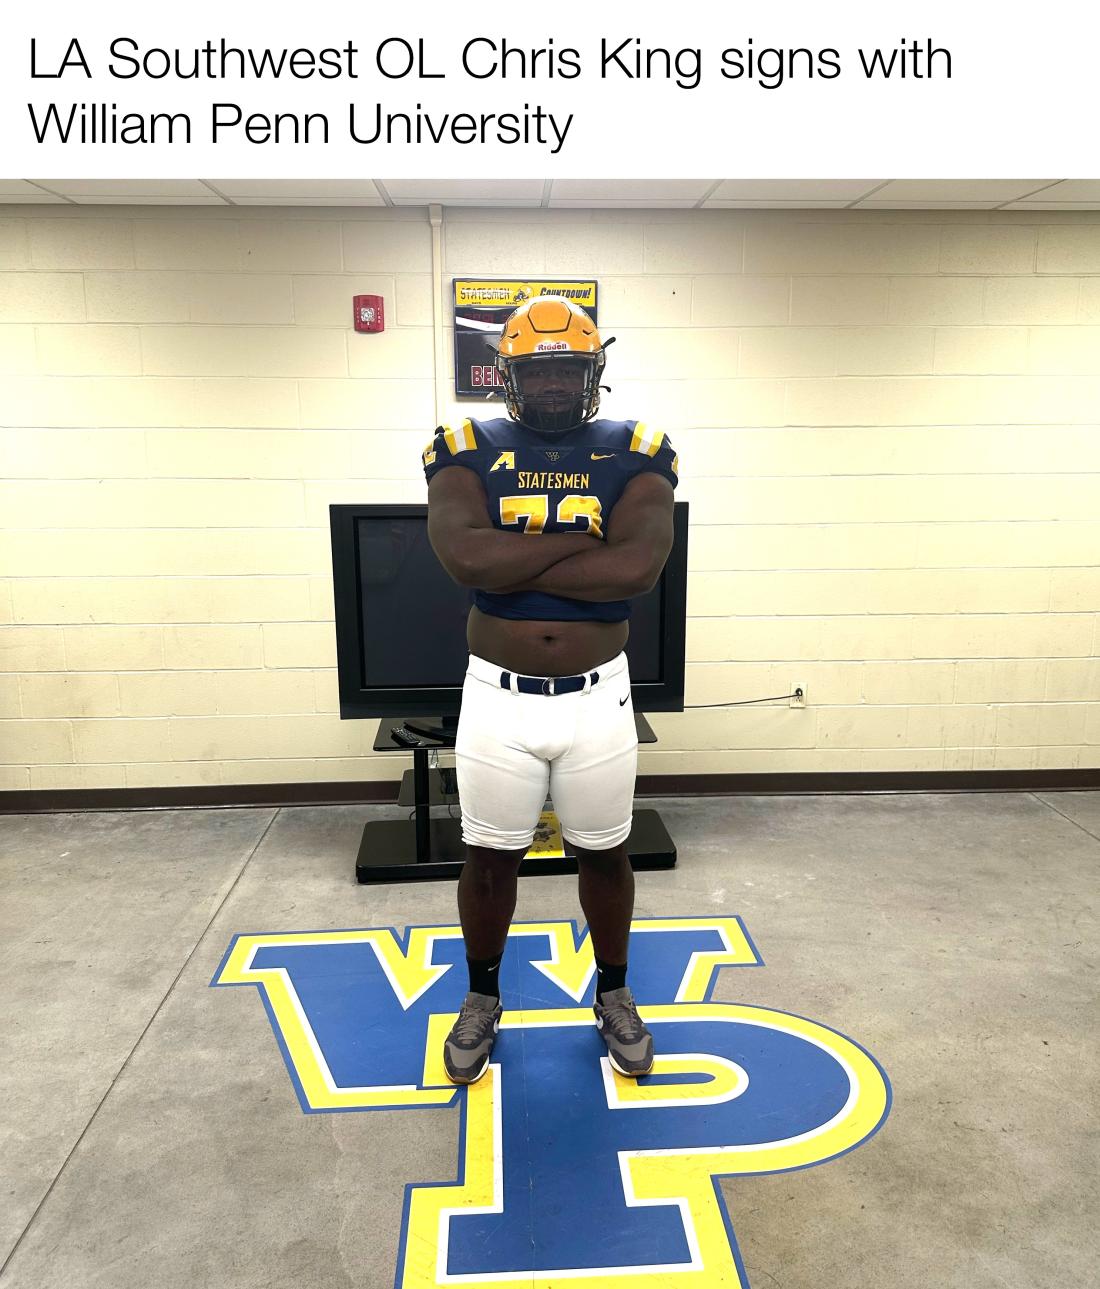 LASC football player Chris King signs with William Penn University